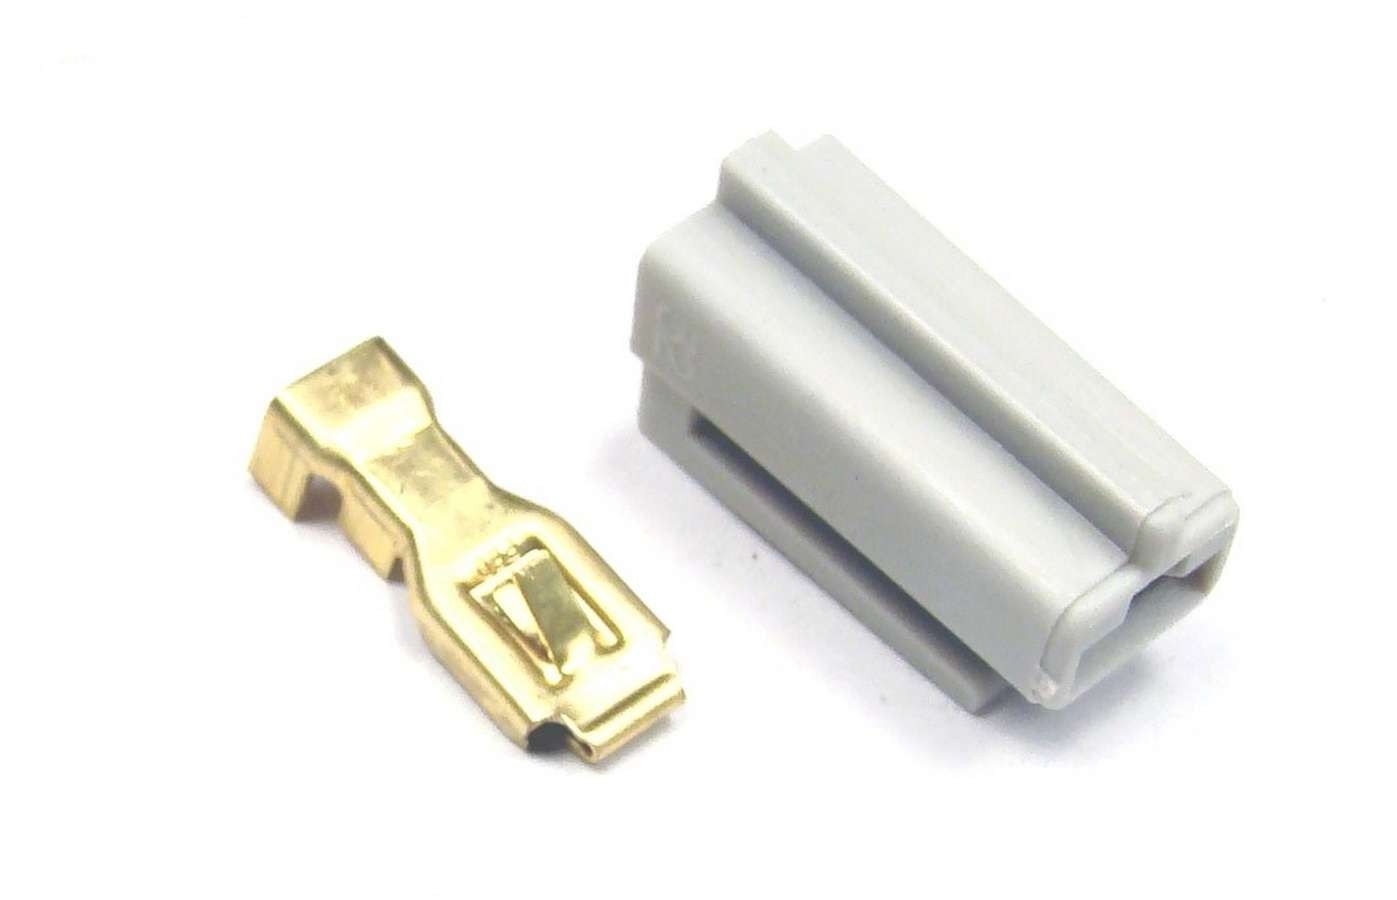 American Autowire 500204 Wire Terminal, Insulated, Female, 1 Wire, Plastic, White, GM HEI Ignition, Each